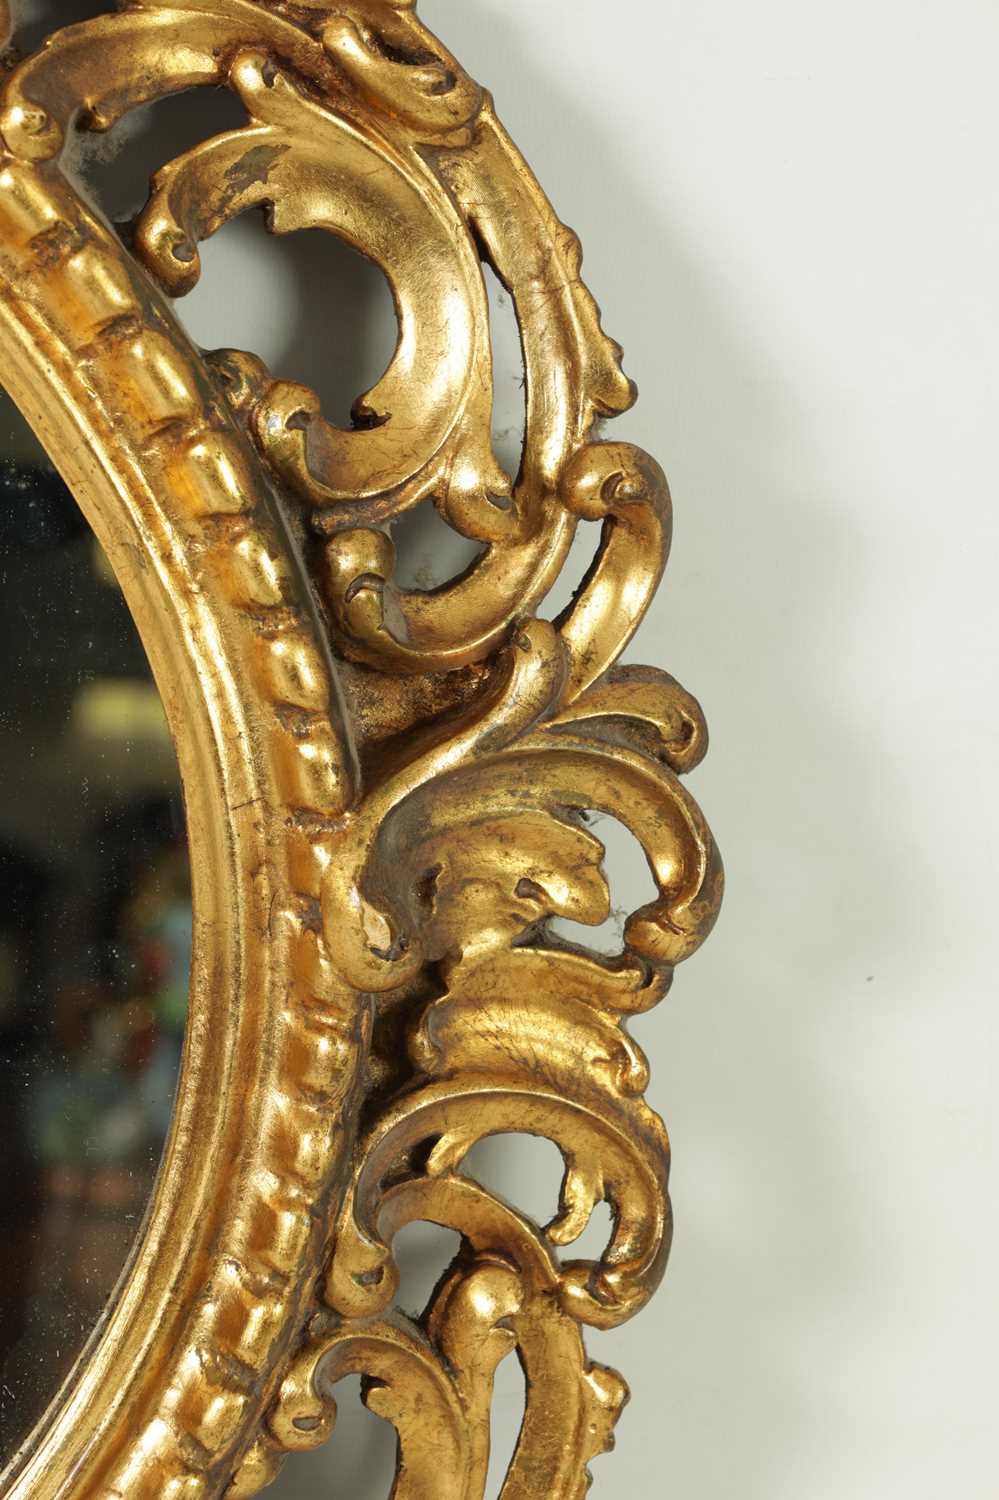 A LARGE OVAL 19TH CENTURY FLORENTINE CARVED GILT WOOD FRAMED MIRROR - Image 4 of 6